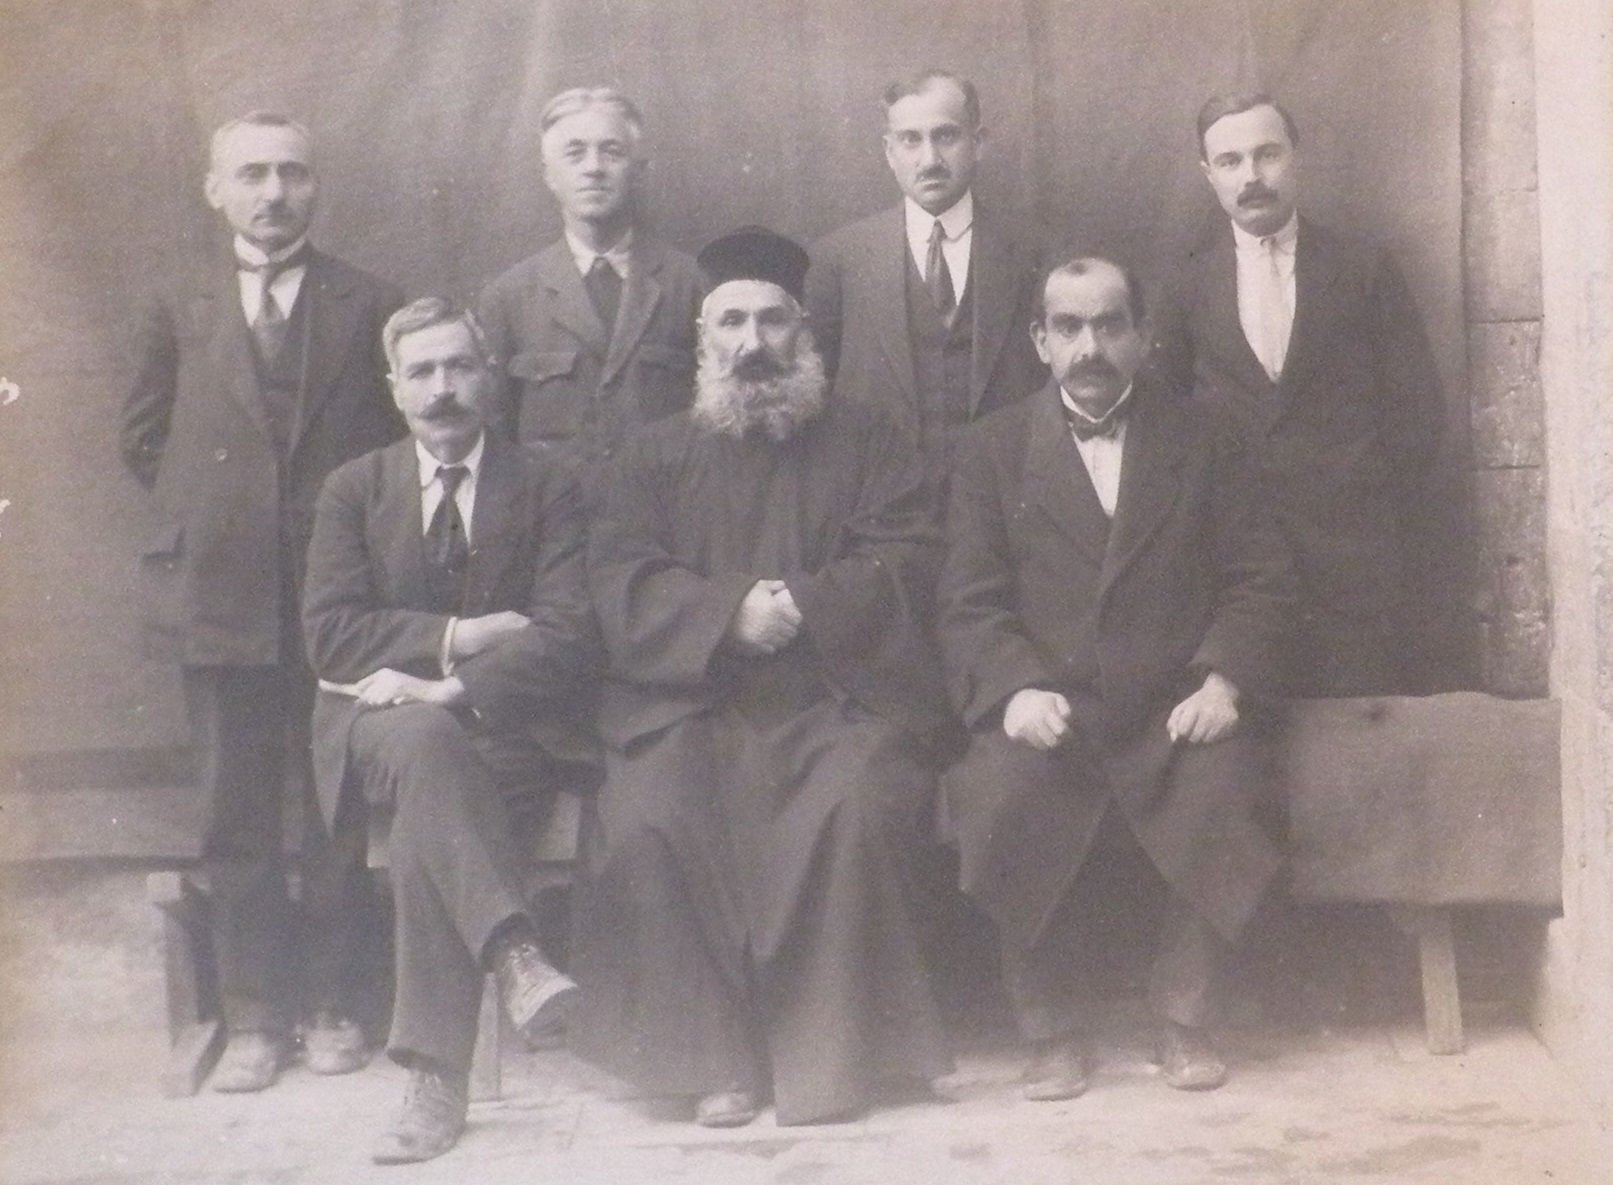 Father Haroutyoun Yessayan (center), who chaired the Council until Ottoman Turkish authorities arrested and imprisoned him.